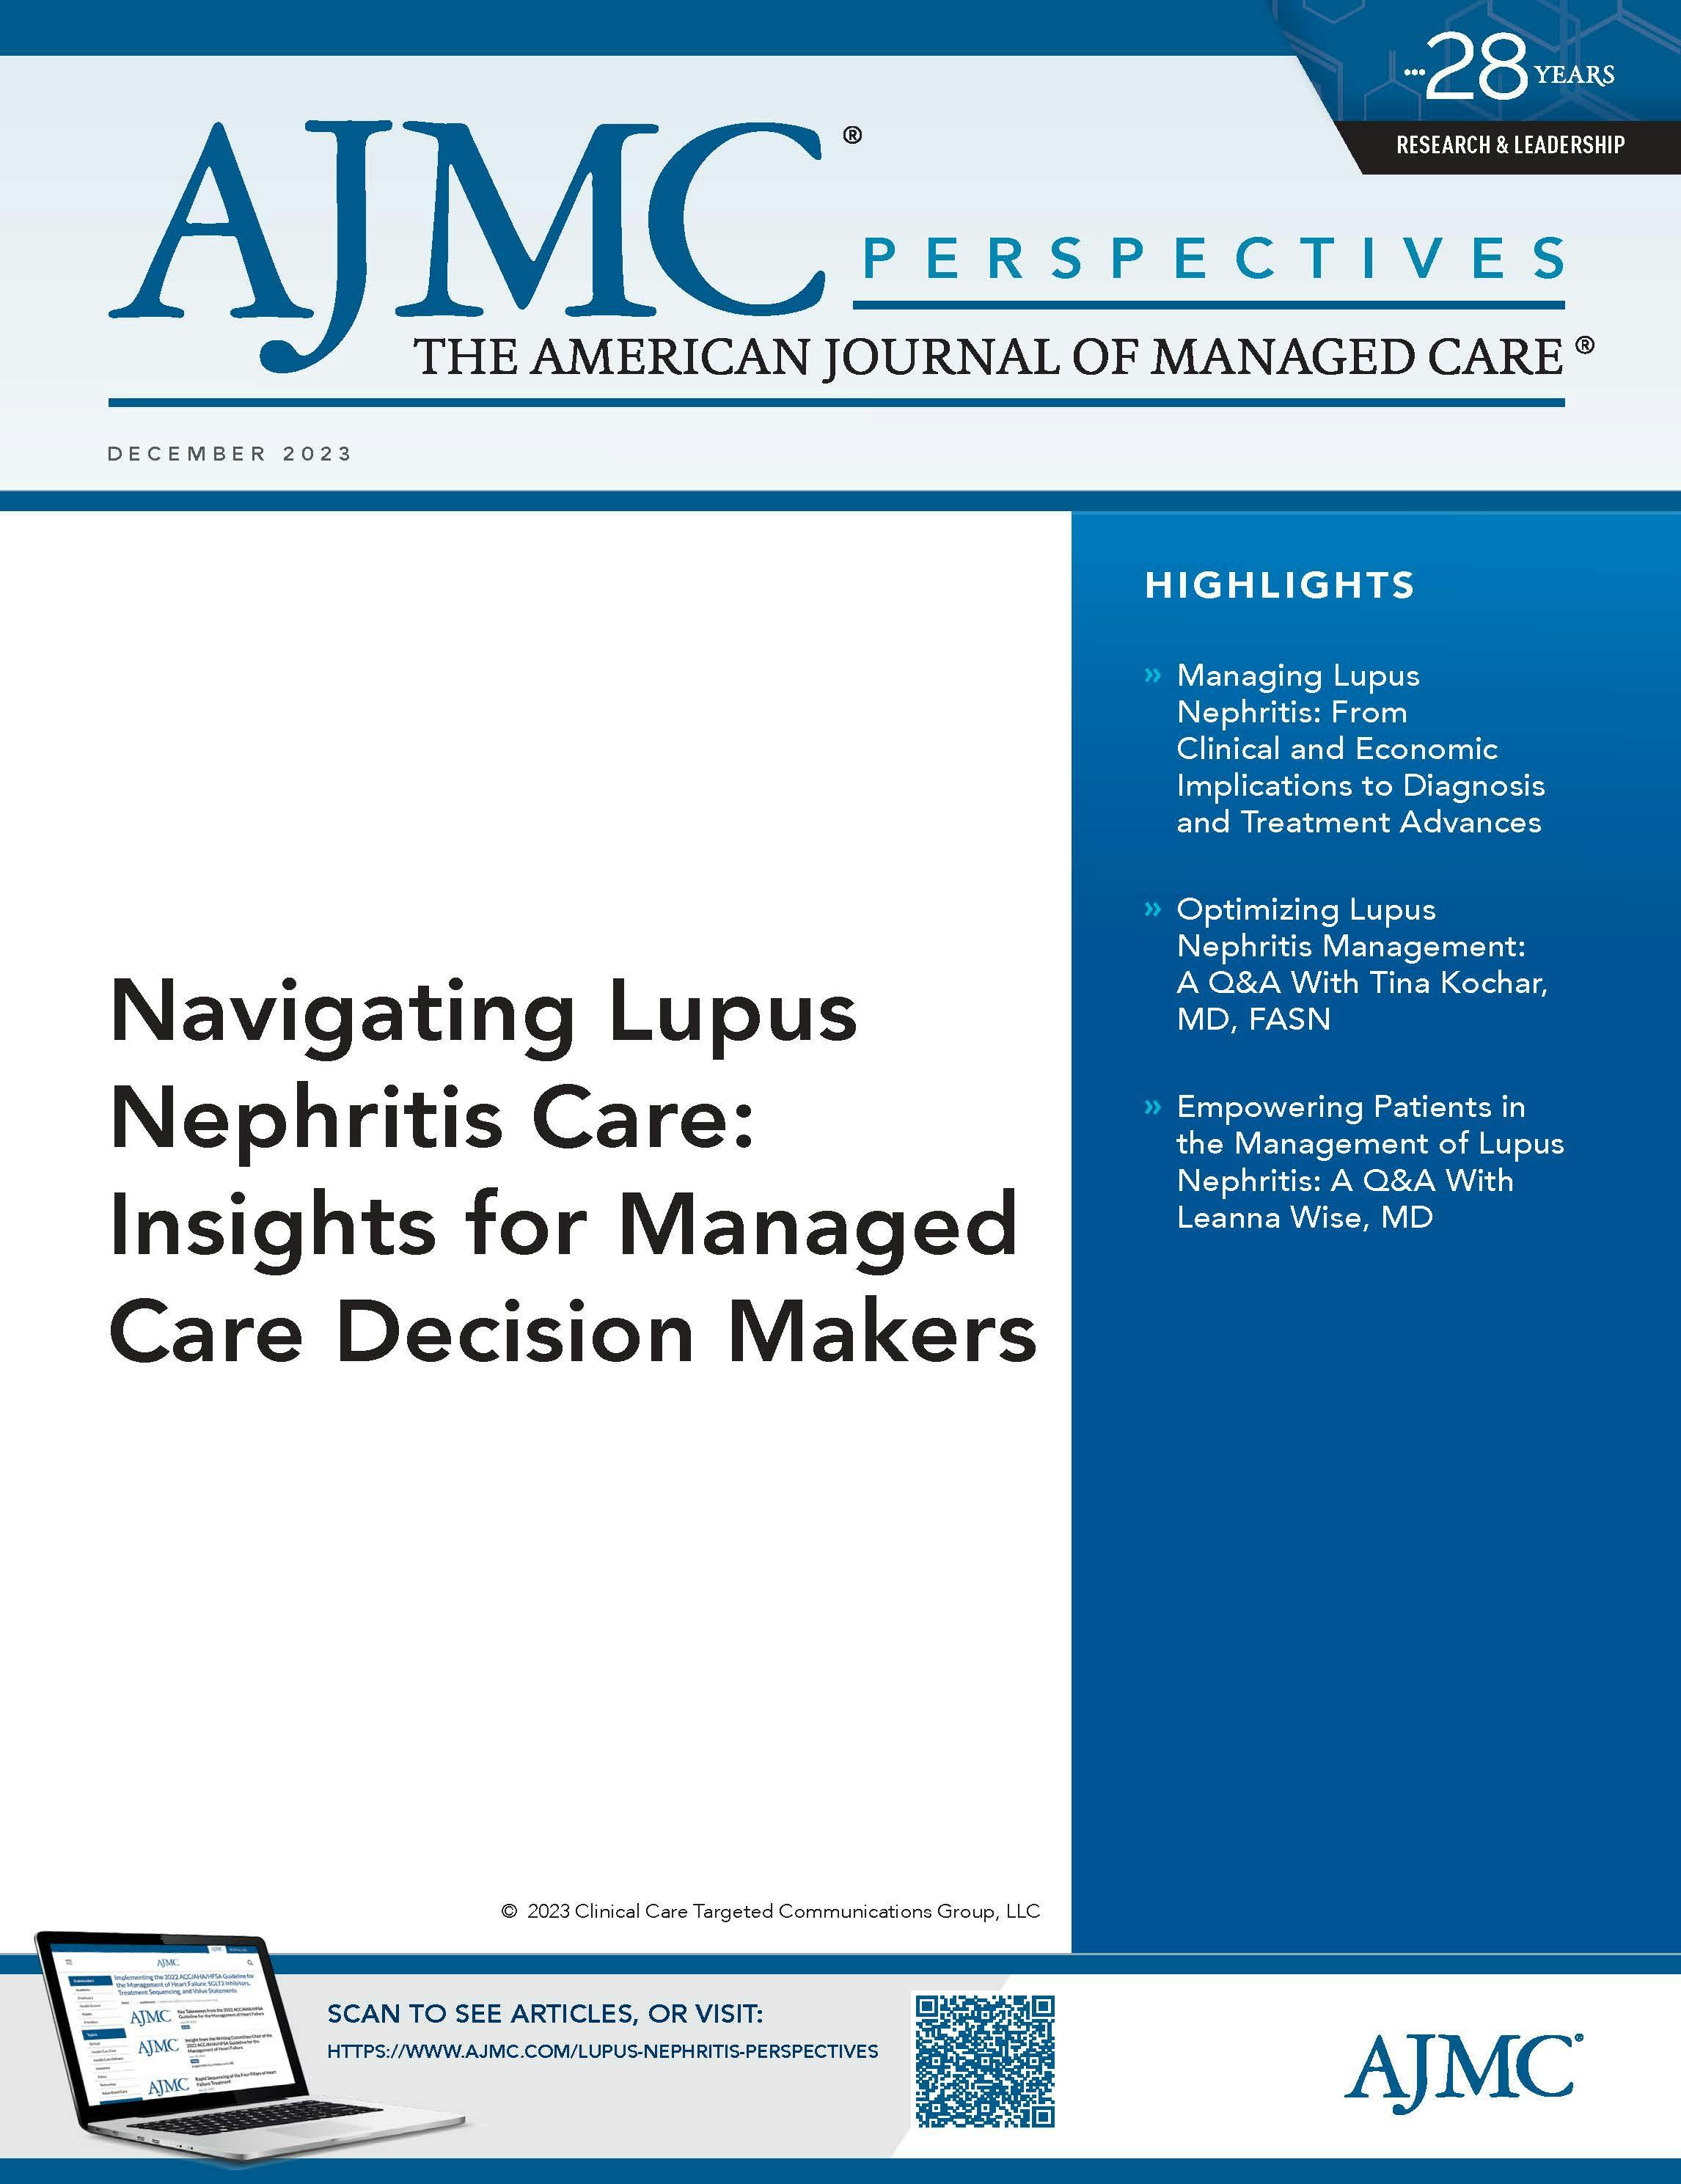 Navigating Lupus Nephritis Care: Insights for Managed Care Decision Makers